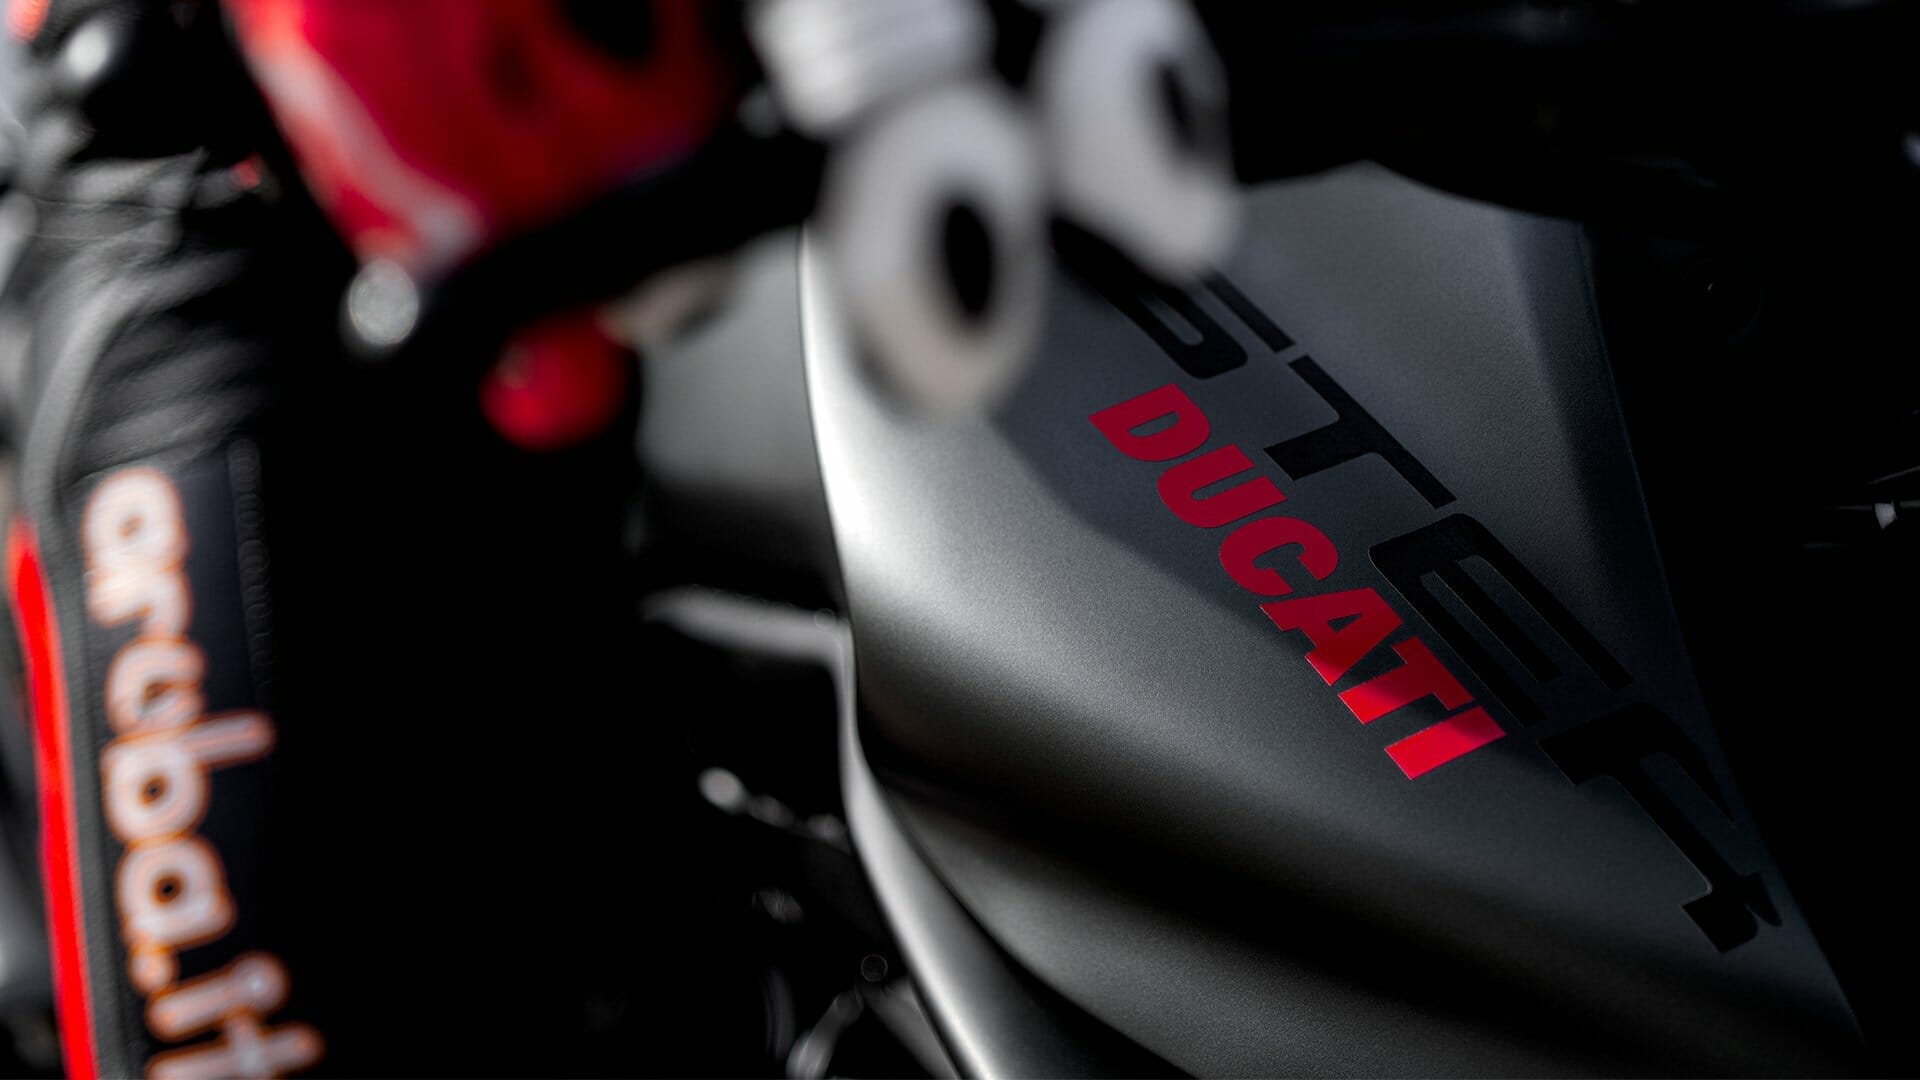 New Ducati Monster is coming
- also in the MOTORCYCLES.NEWS APP